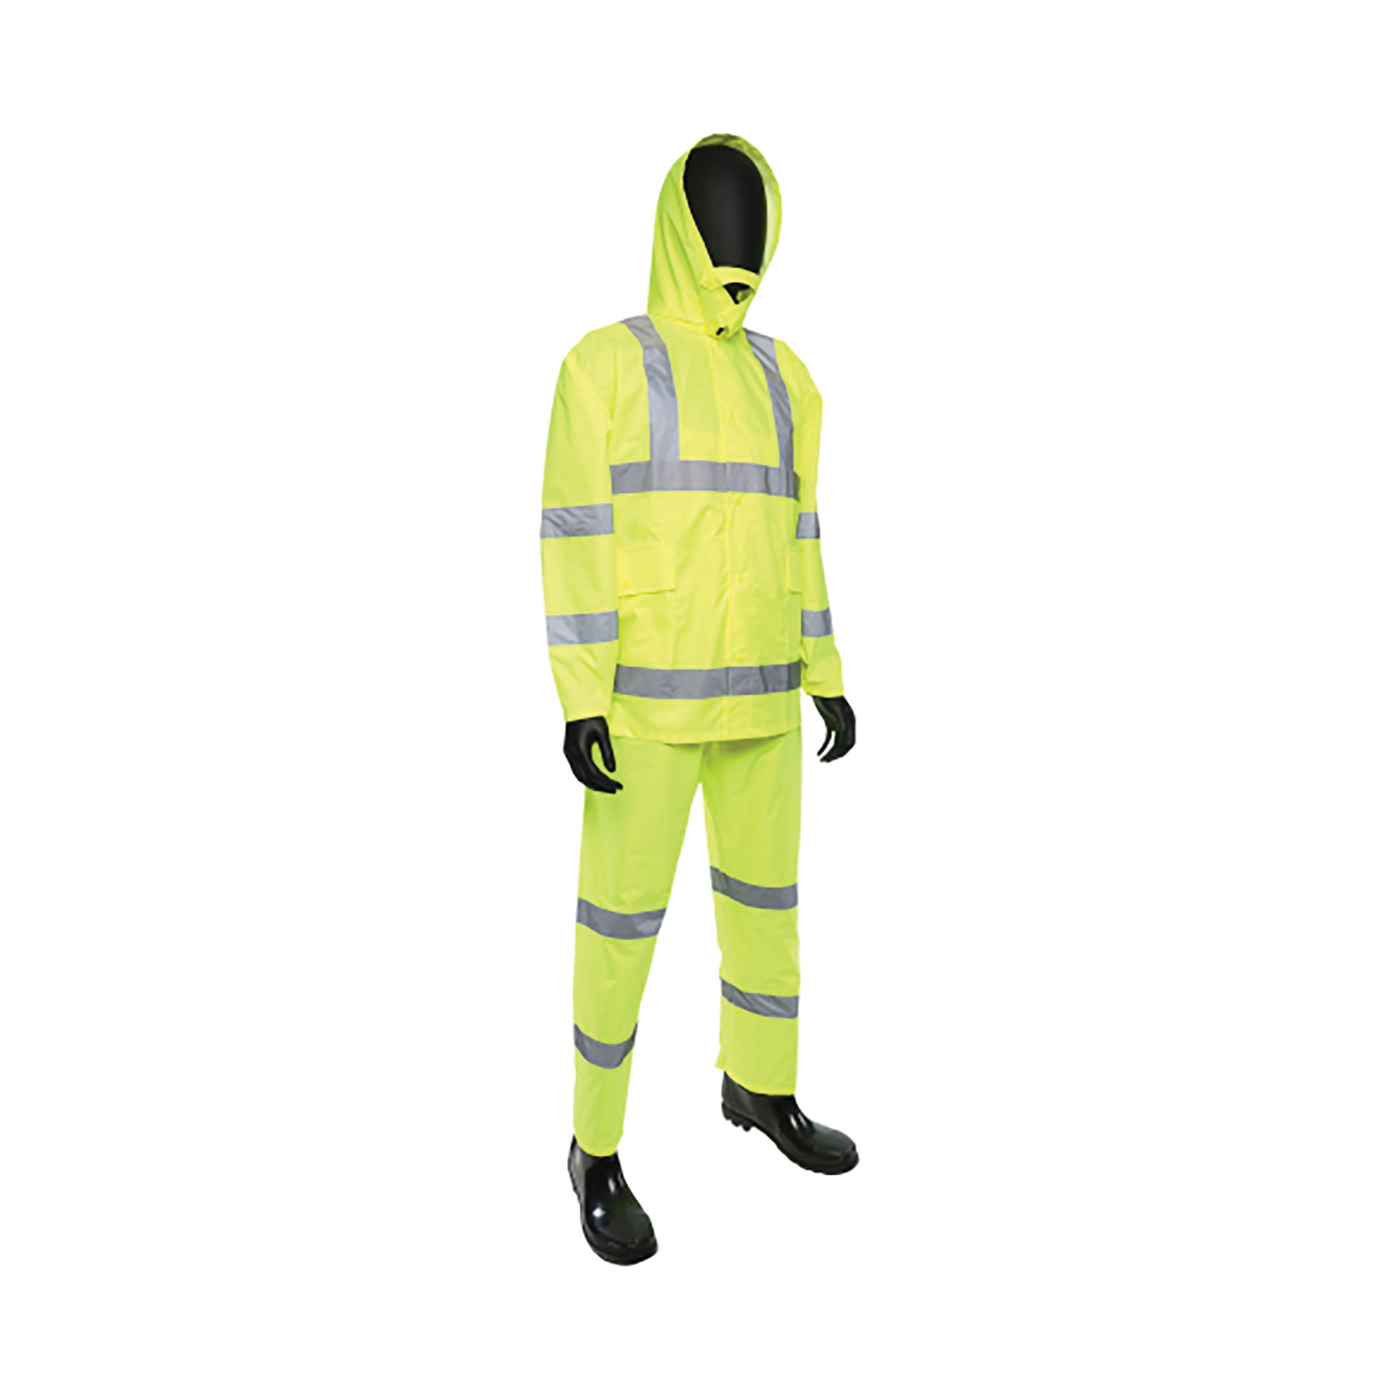 PIP® 4033/L 3-Piece Rainsuit, L, Fluorescent Lime Green/Reflective Stripe, Polyester Oxford/Polyurethane Coated, 48 in Waist, 30-1/2 in L Inseam, Detachable Hood